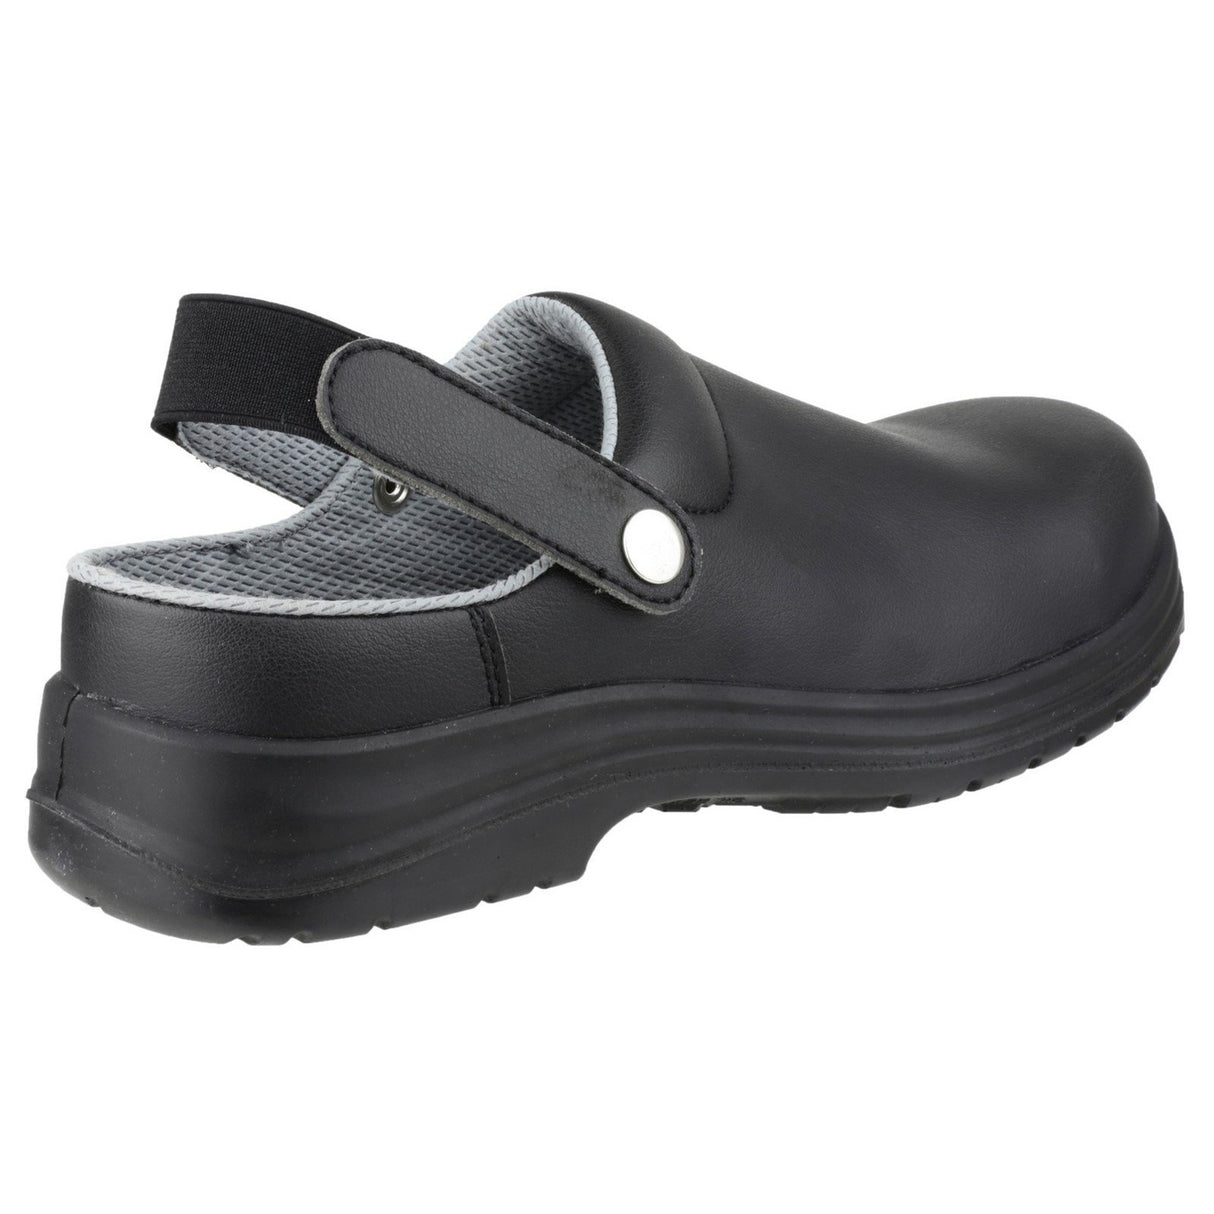 Amblers Safety Clog Safety Shoes